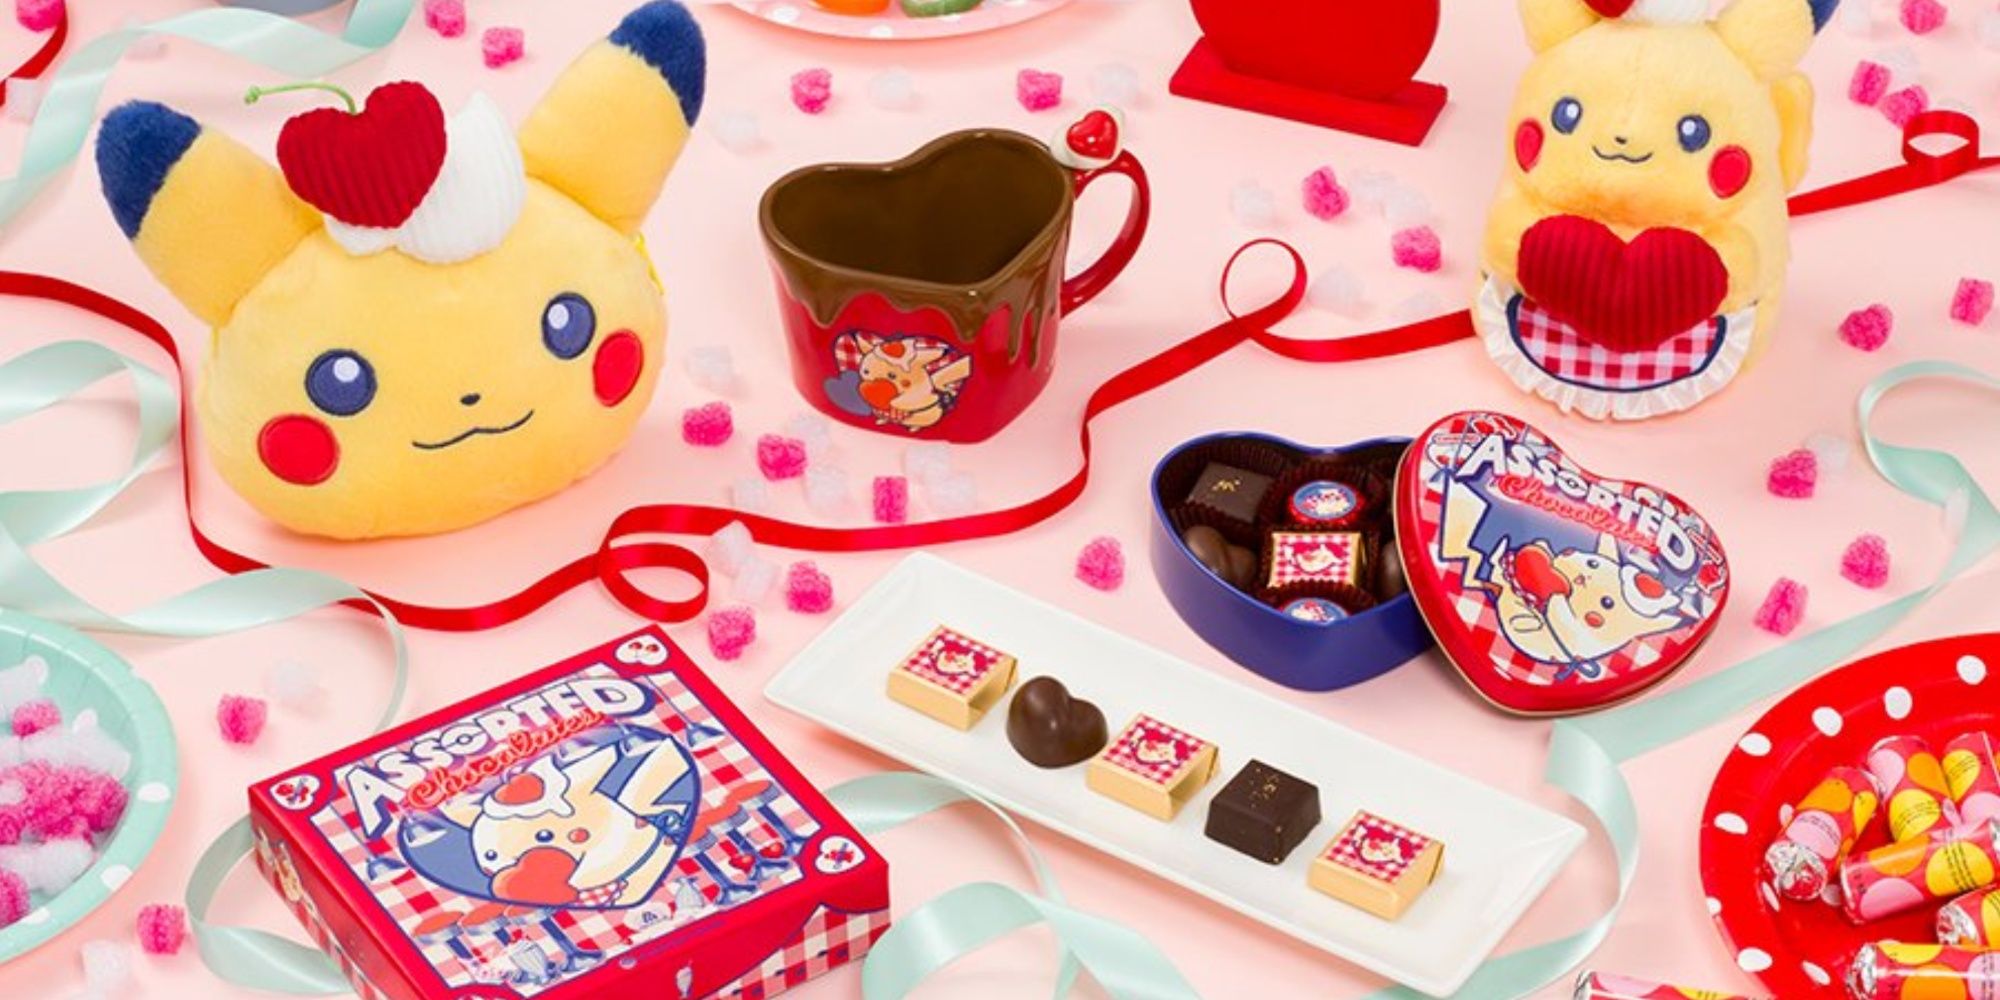 pikachu plushes and chocolates in pokemon valentine's collection